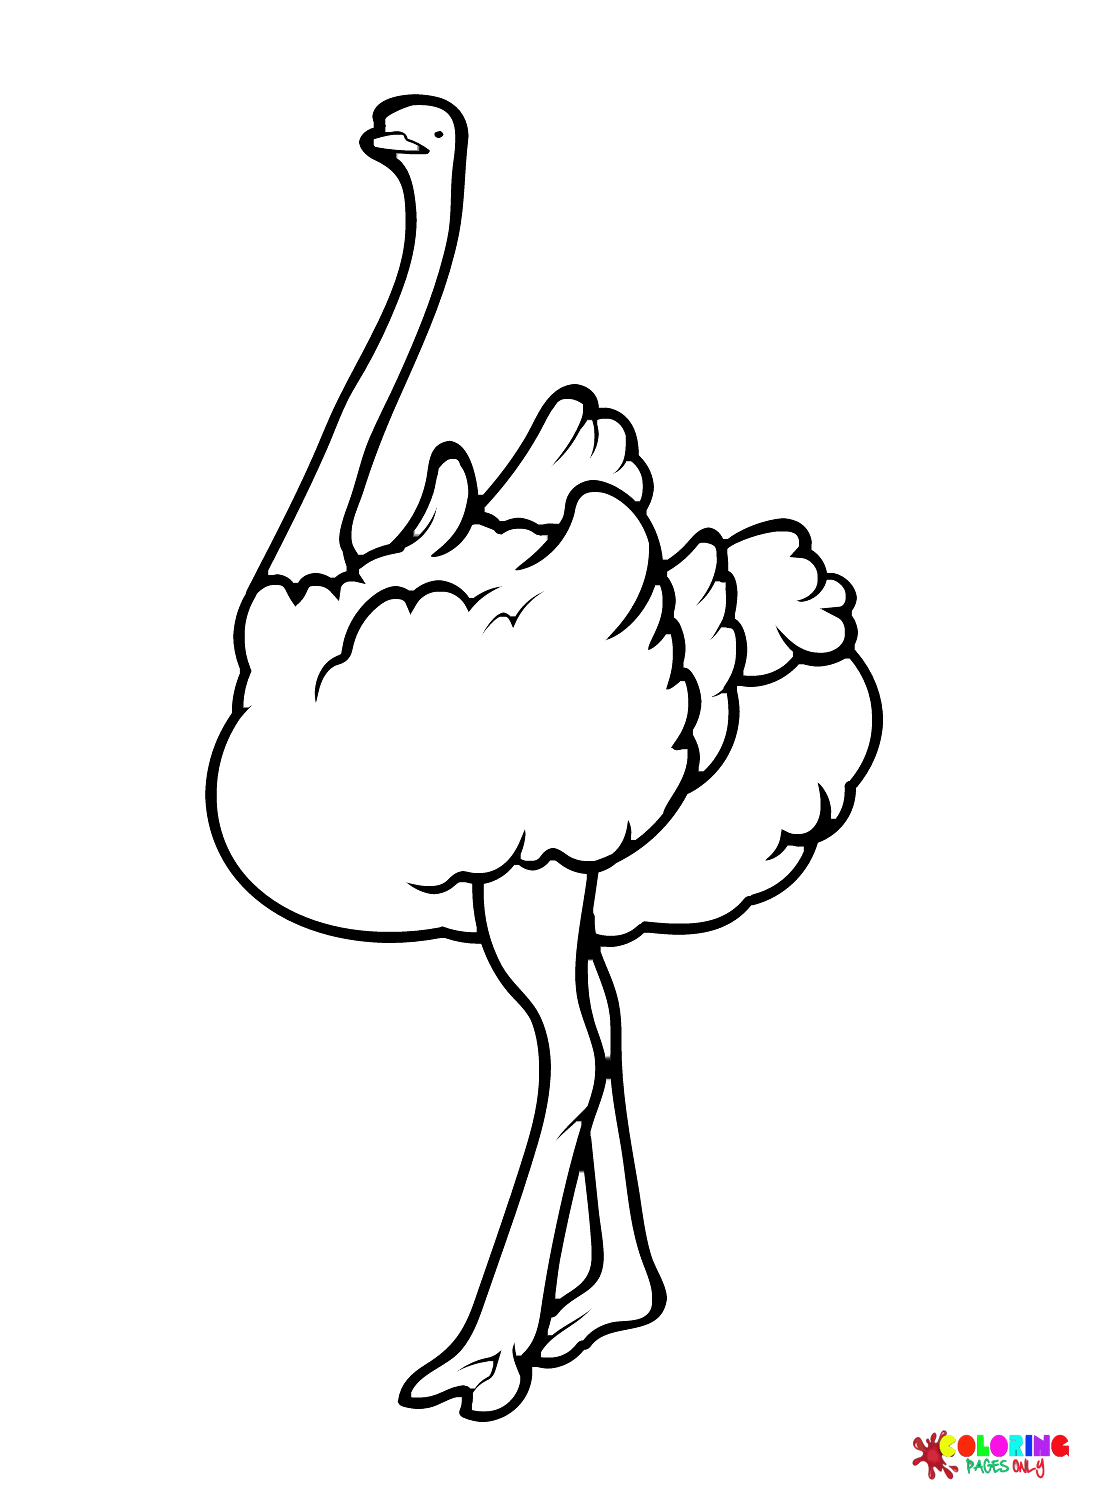 Ostrich Coloring Pages Printable for Free Download